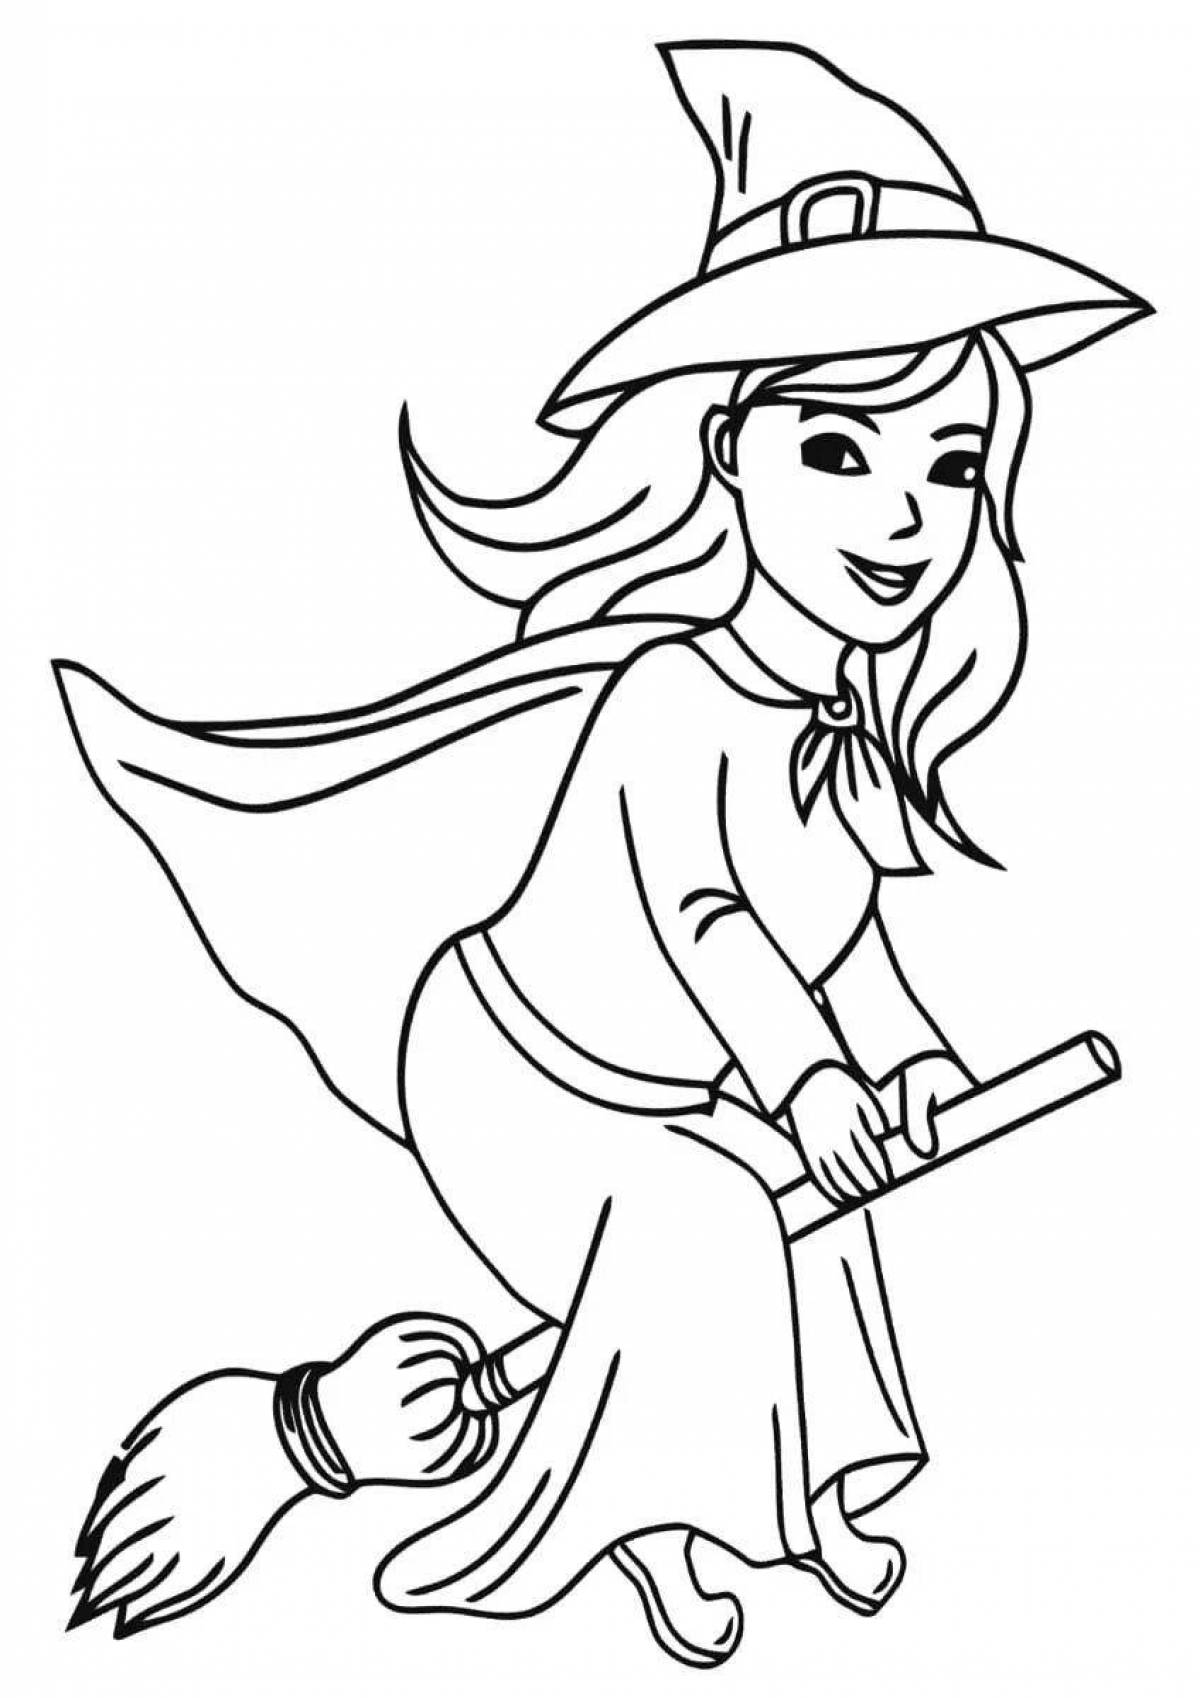 Supernatural witch coloring book